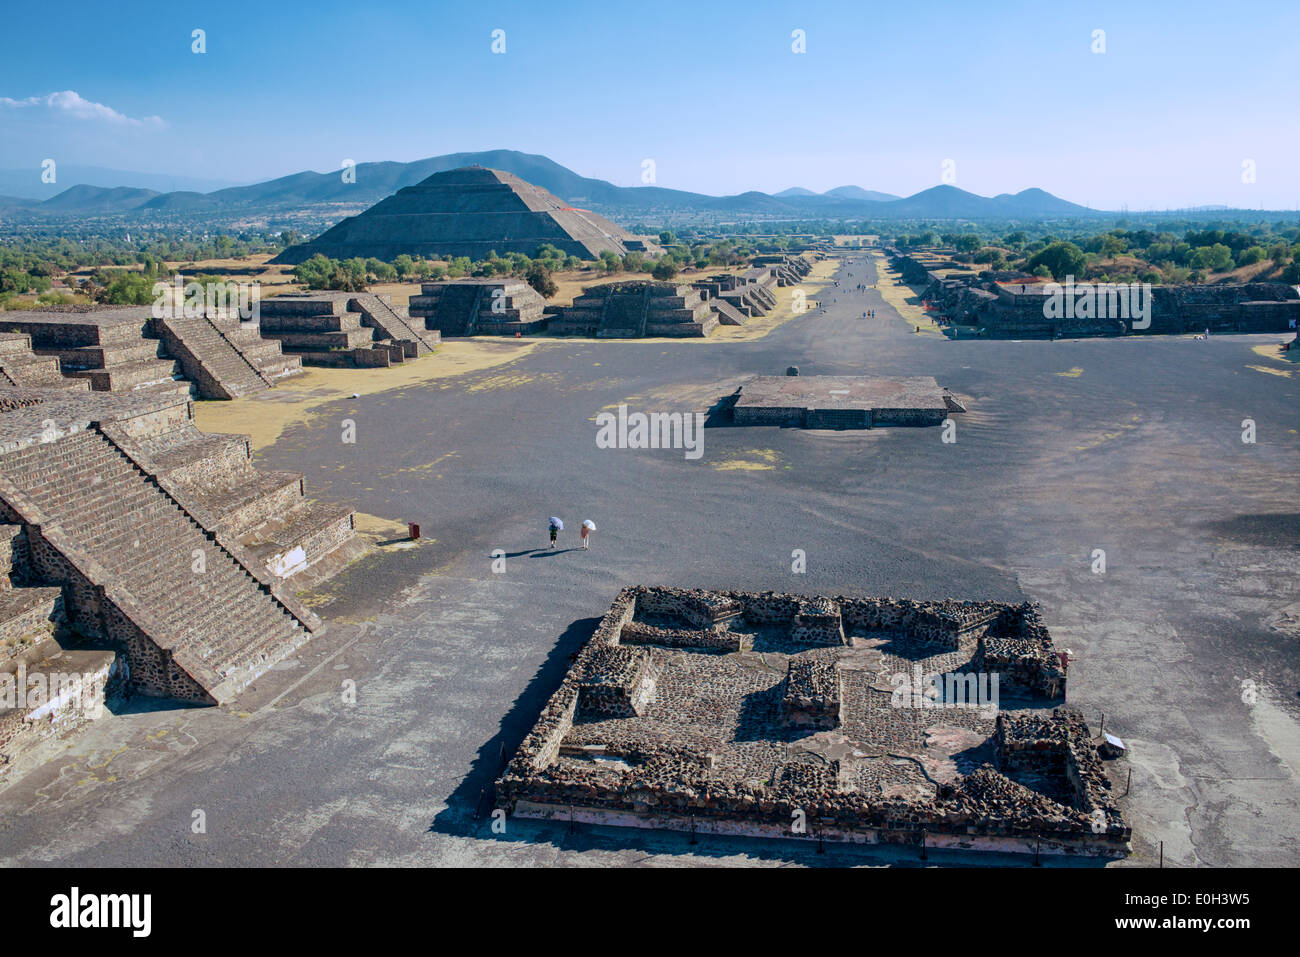 Avenue of the Dead and Pyramid of the Sun from Pyramid of the Moon Teotihuacan Mexico Stock Photo